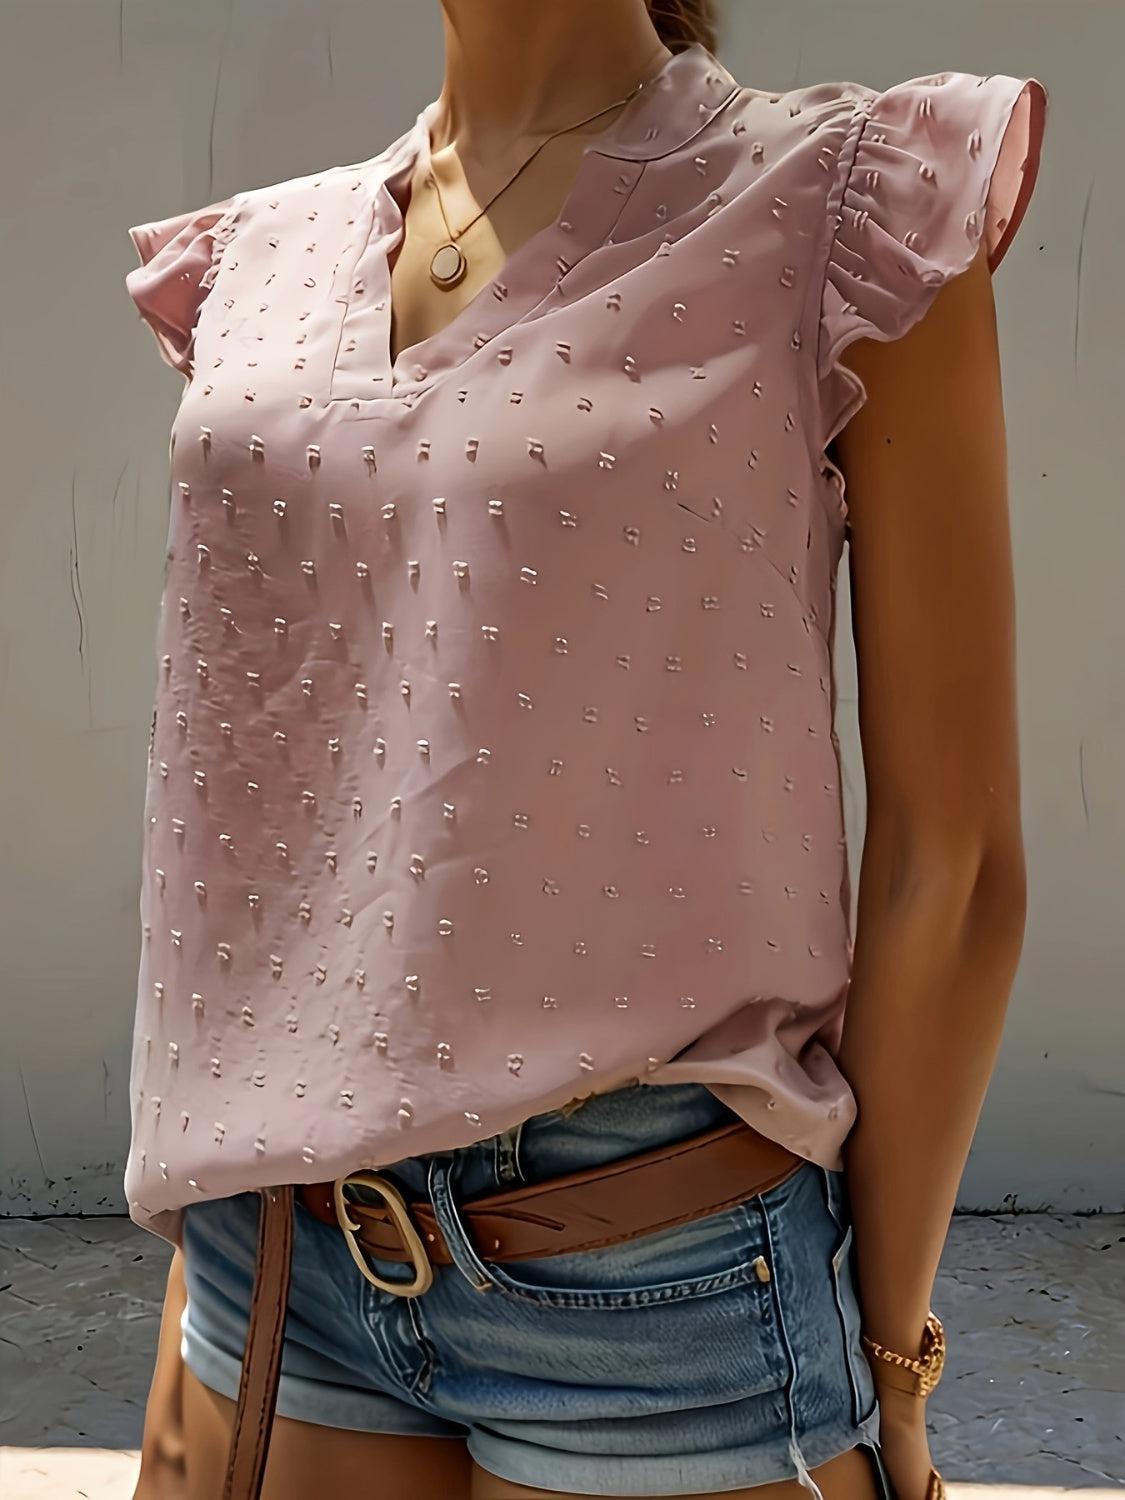 a mannequin wearing a pink blouse and denim shorts